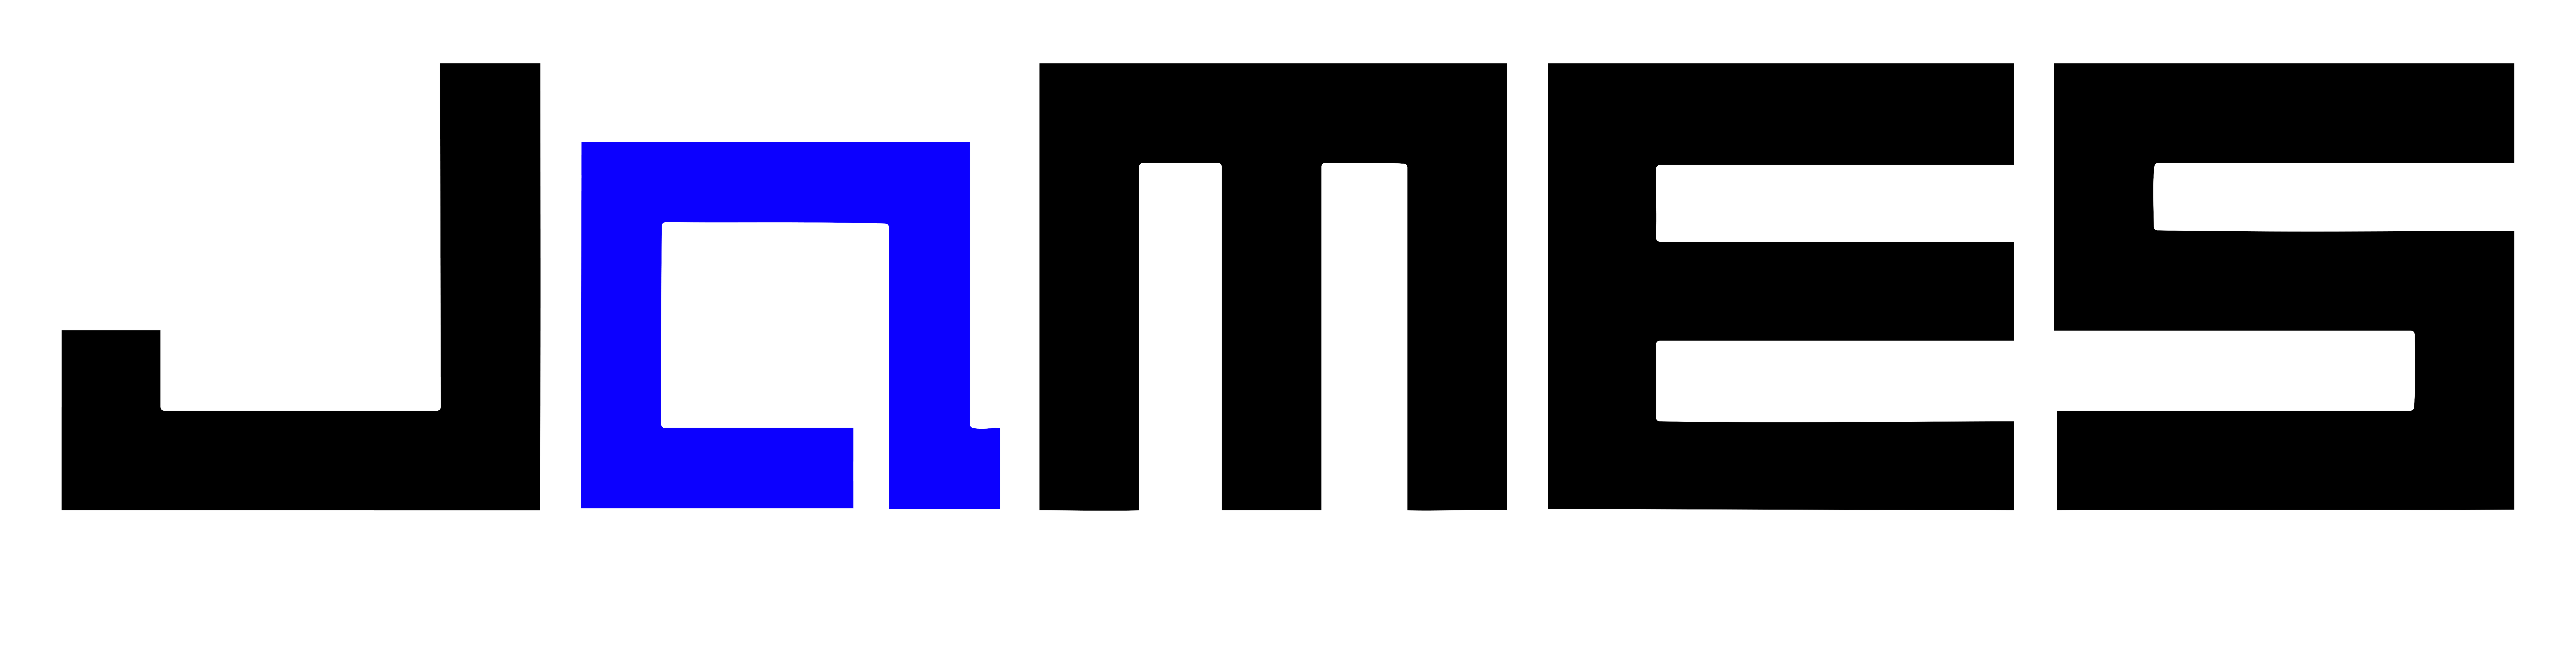 Journal of Mathematics Education and Science